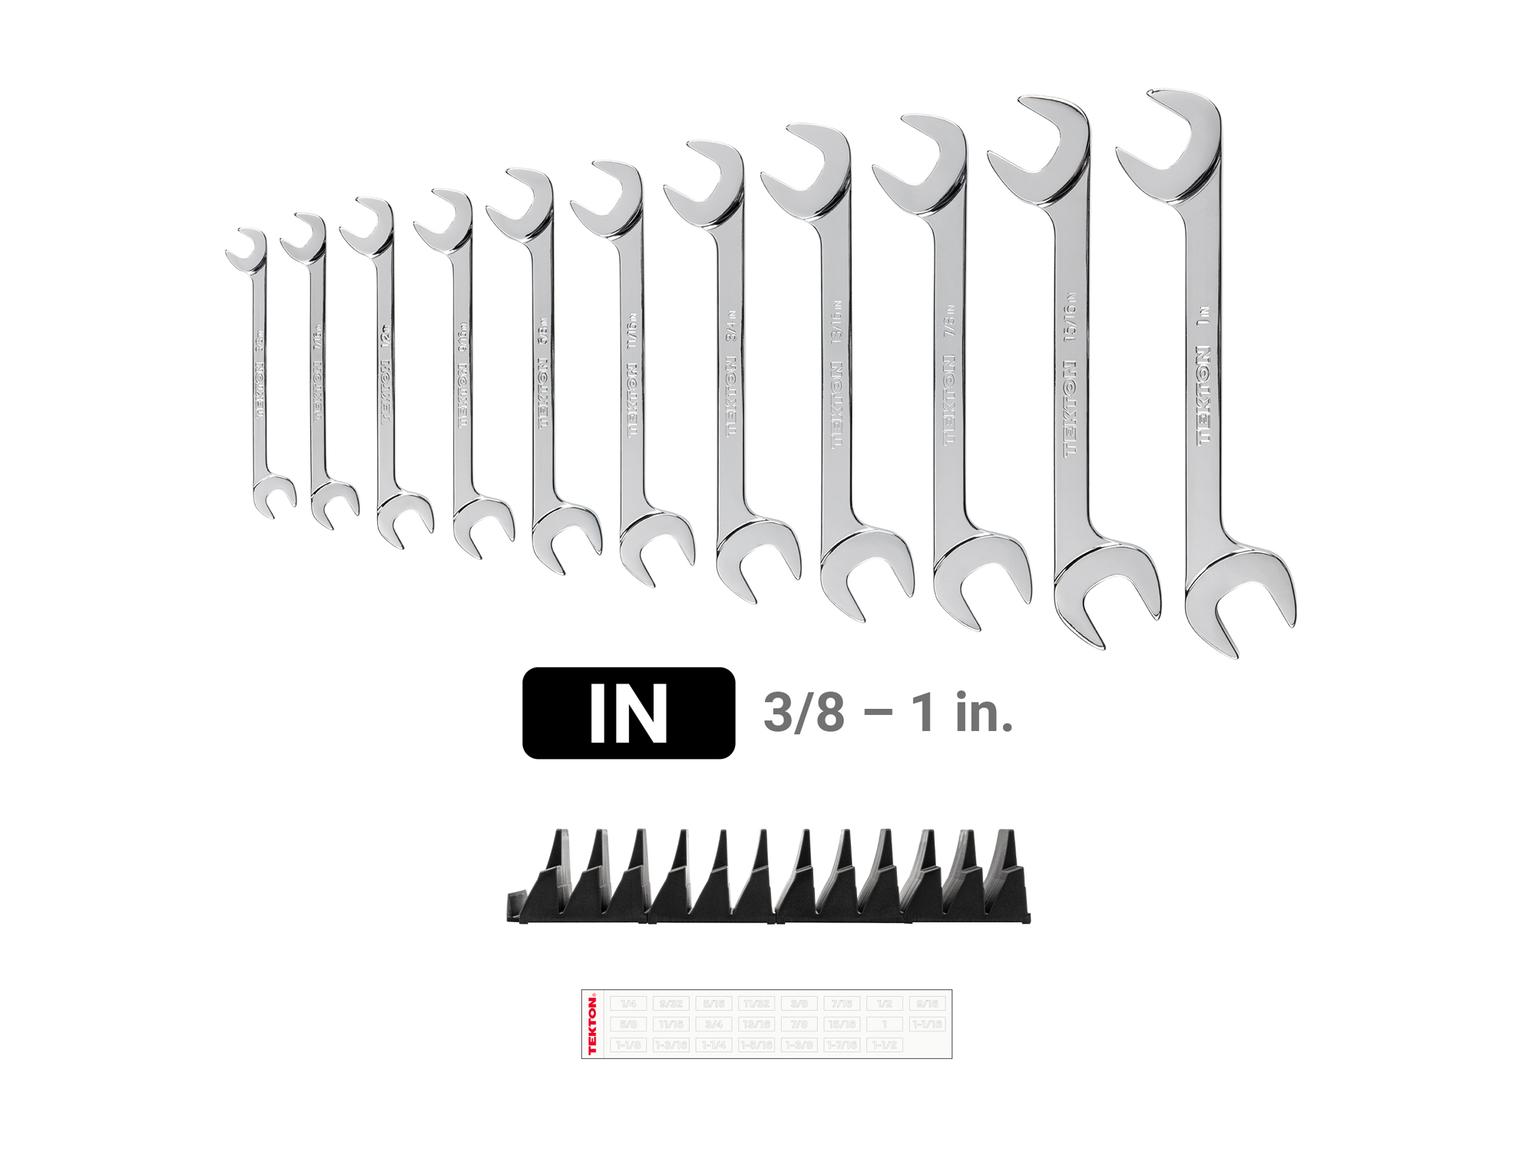 TEKTON WAE95102-T Angle Head Open End Wrench Set with Modular Slotted Organizer, 11-Piece (3/8 - 1 in.)